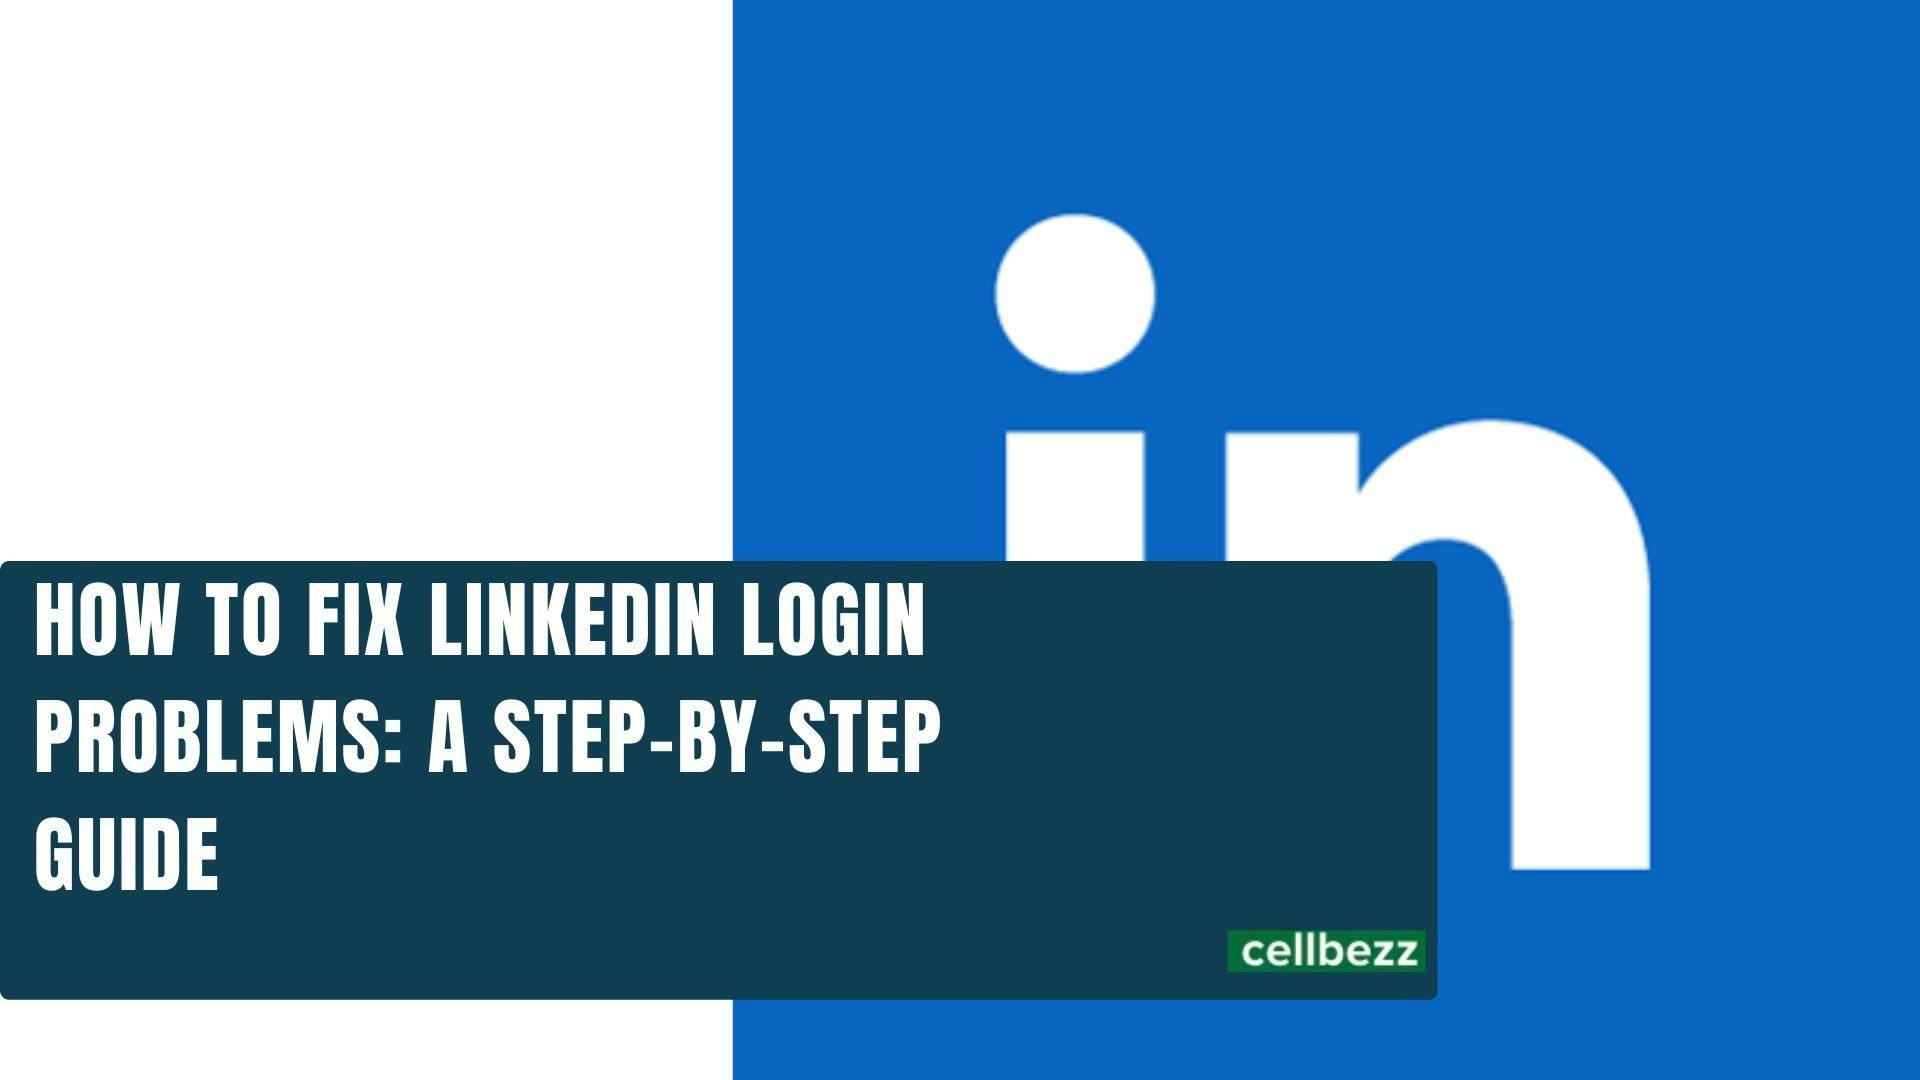 How to Fix LinkedIn Login Problems: A Step-by-Step Guide featured image 